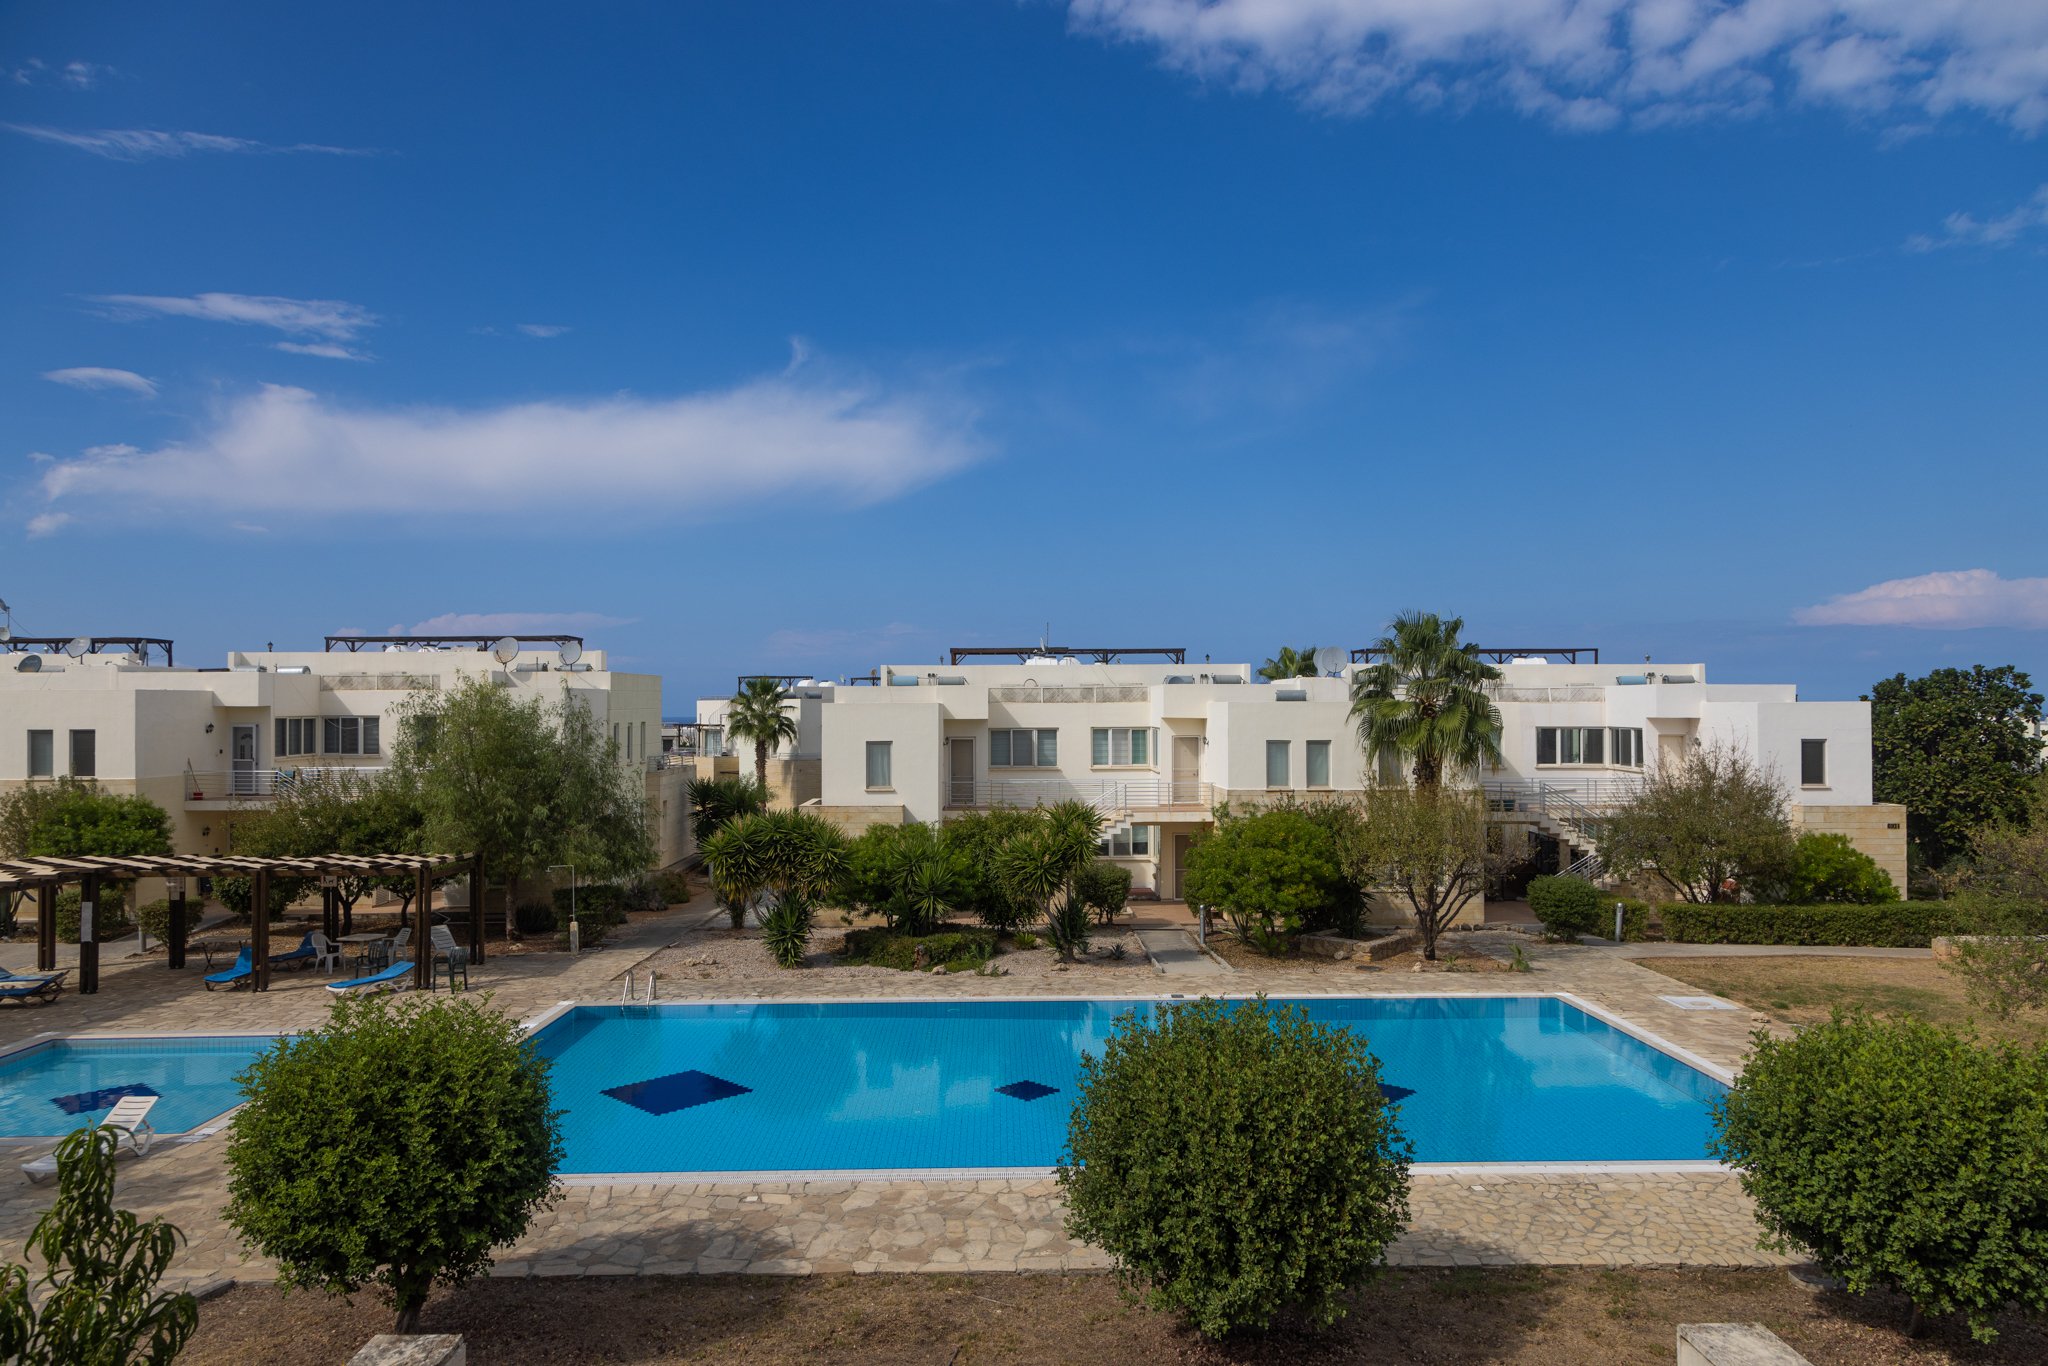 A stunning 2-bedroom property with a breathtaking pool view!, Esentepe